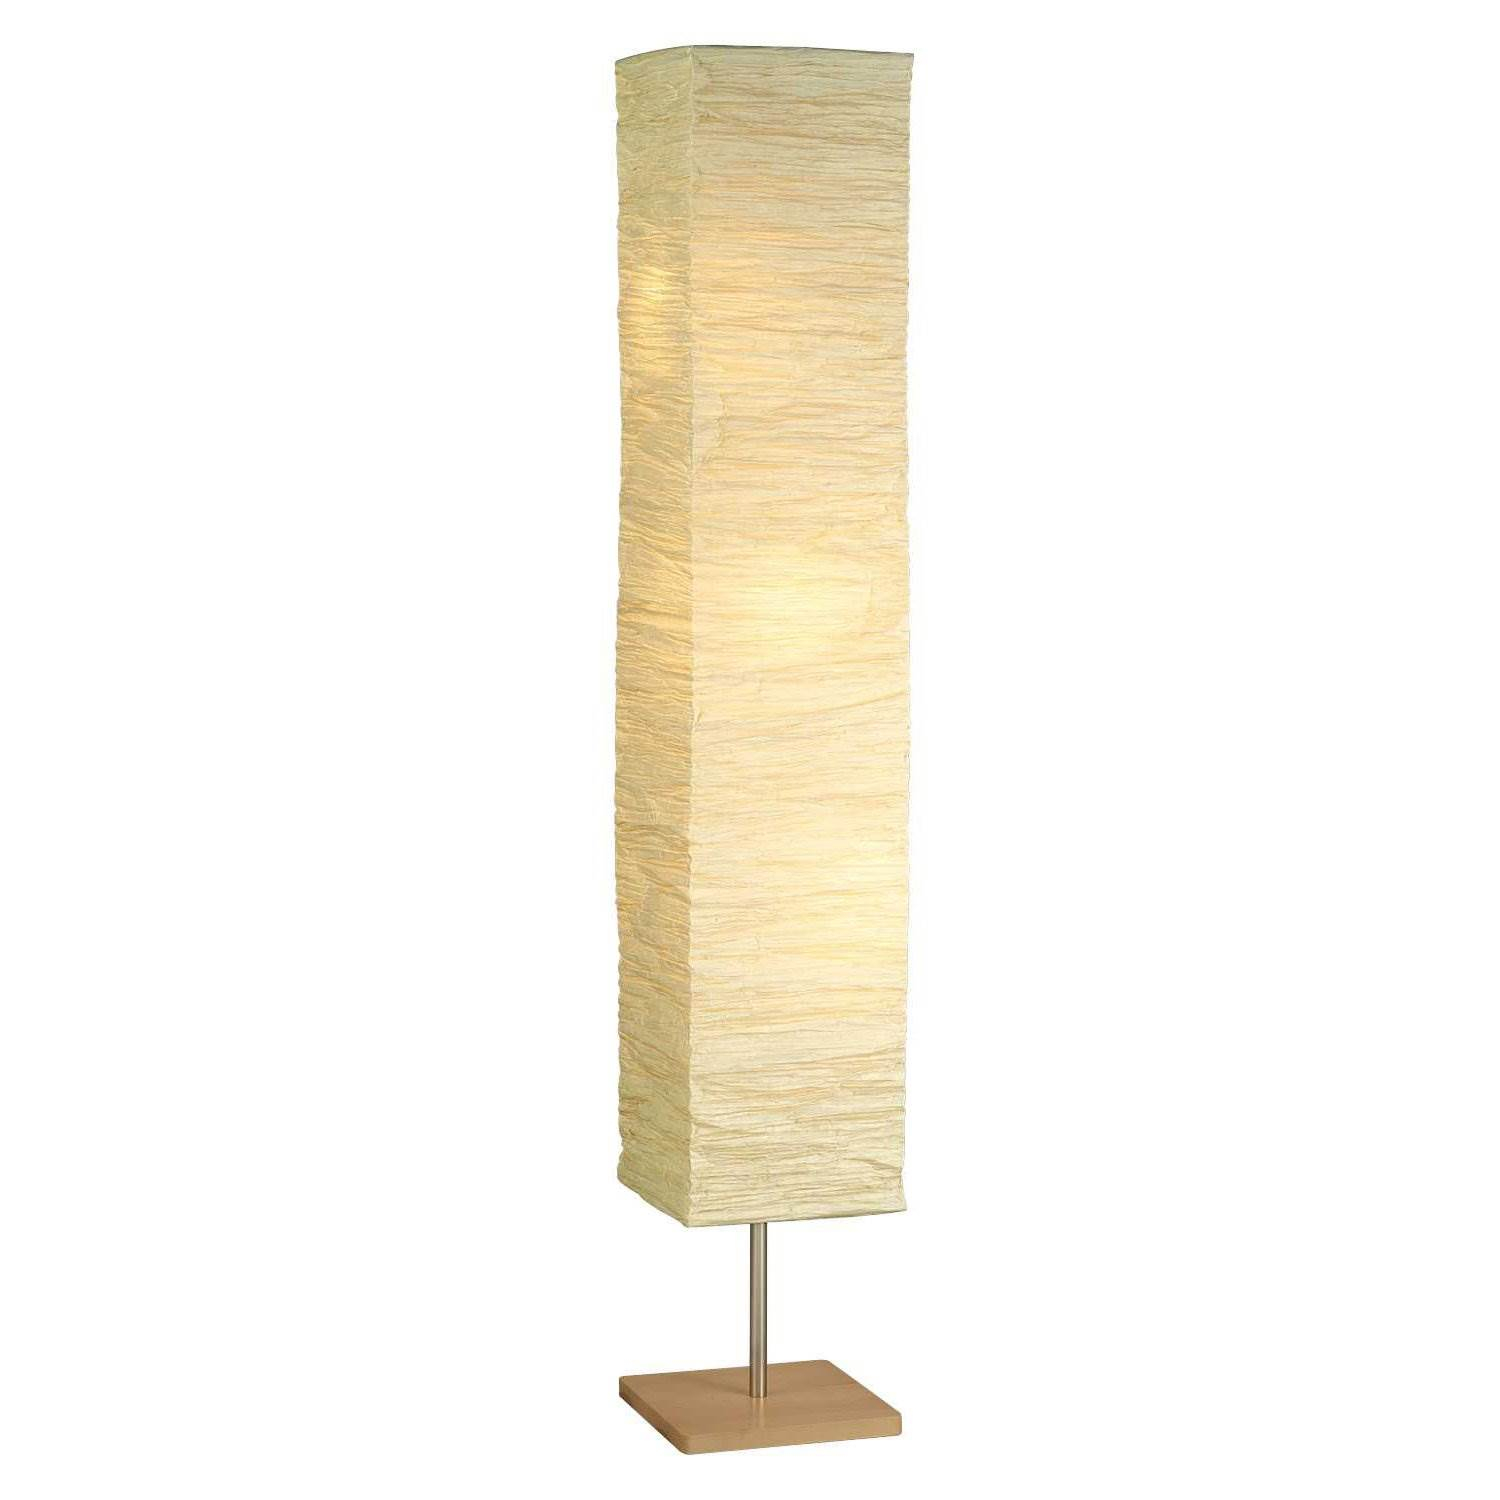 Adesso Dune Floorchiere Lamp Natural Finish Walmart with sizing 1500 X 1500